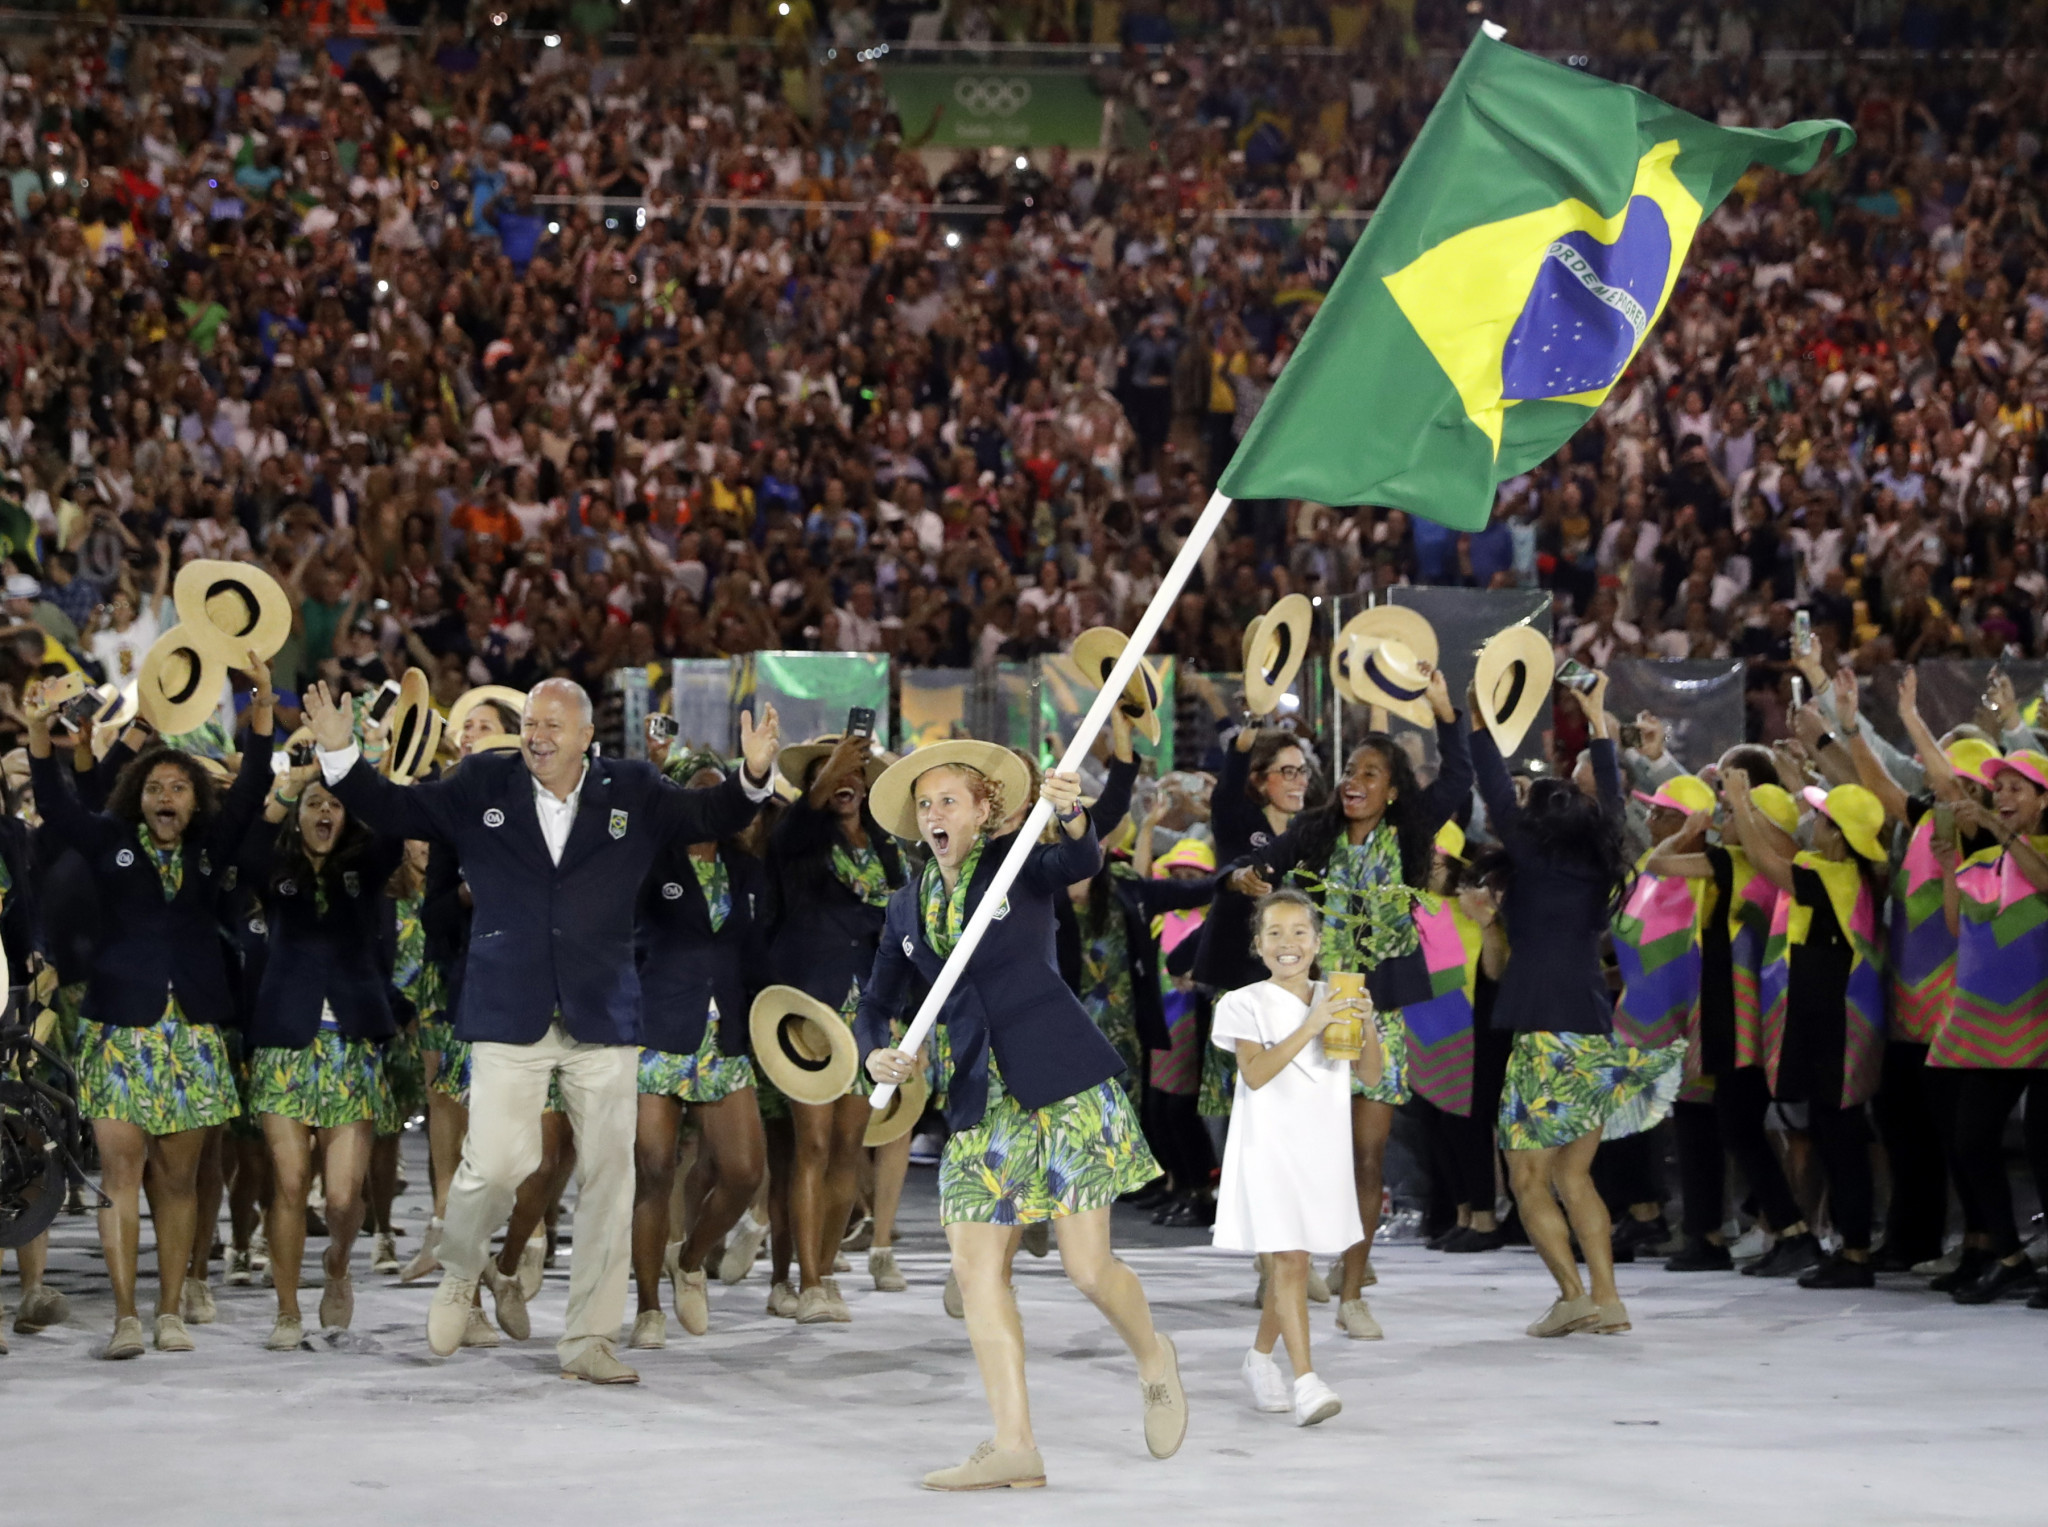 The small Brazilian contingent marching at the Tokyo 2020 Opening Ceremony will be in stark contrast to Rio 2016 at the Maracanã Stadium ©Getty Images